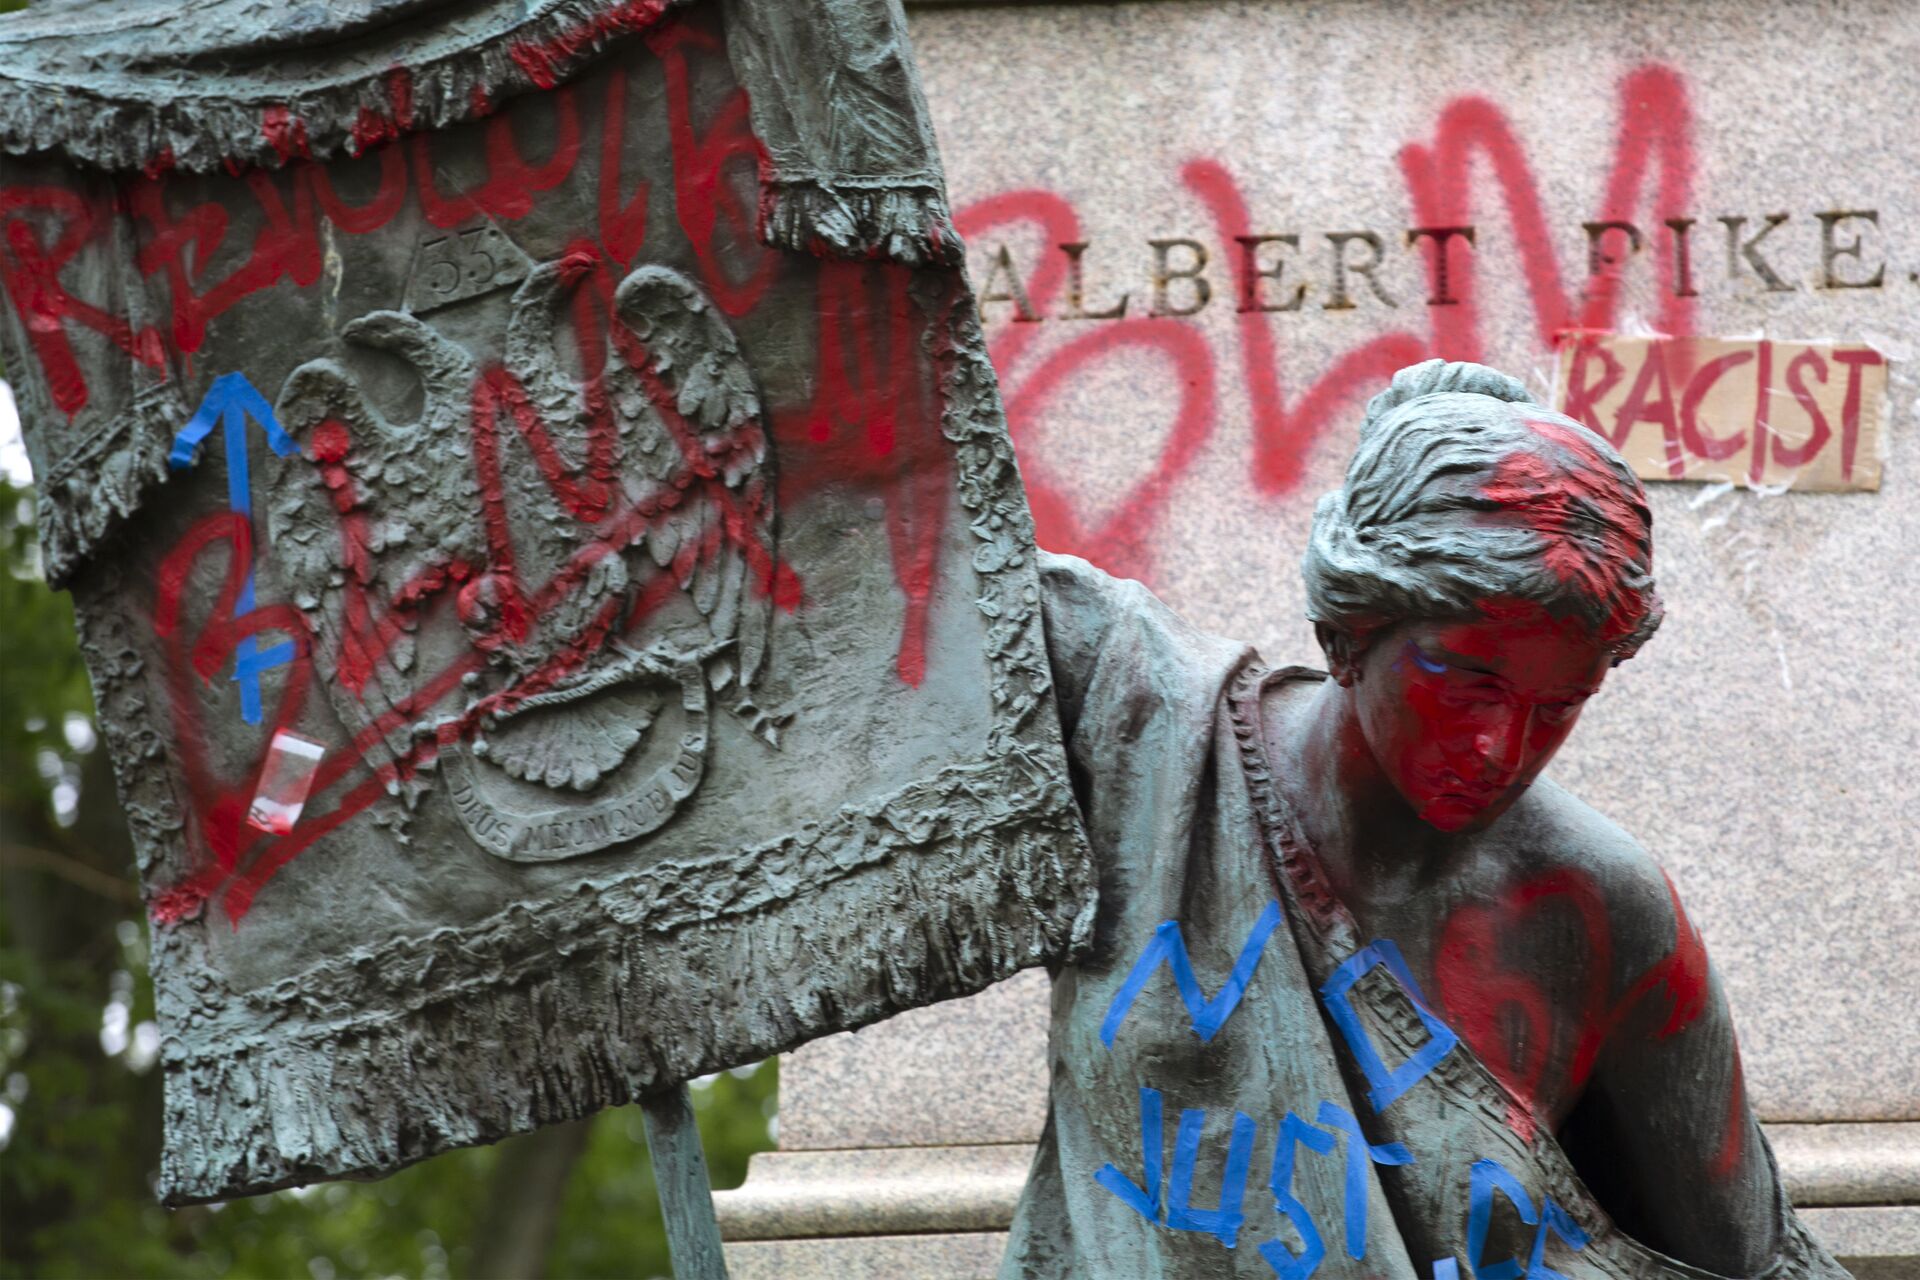 The bronze sculpture representing the Goddess of Masonry on the base of the statue of a Confederate general, Albert Pike, is seen with red paint, after protestors toppled Pike statue's and set on fire early Saturday, June 20, 2020, in Washington. It comes on Juneteenth, the day marking the end of slavery in the United States, amid continuing anti-racism demonstrations following the death of George Floyd in Minneapolis - Sputnik International, 1920, 11.11.2021